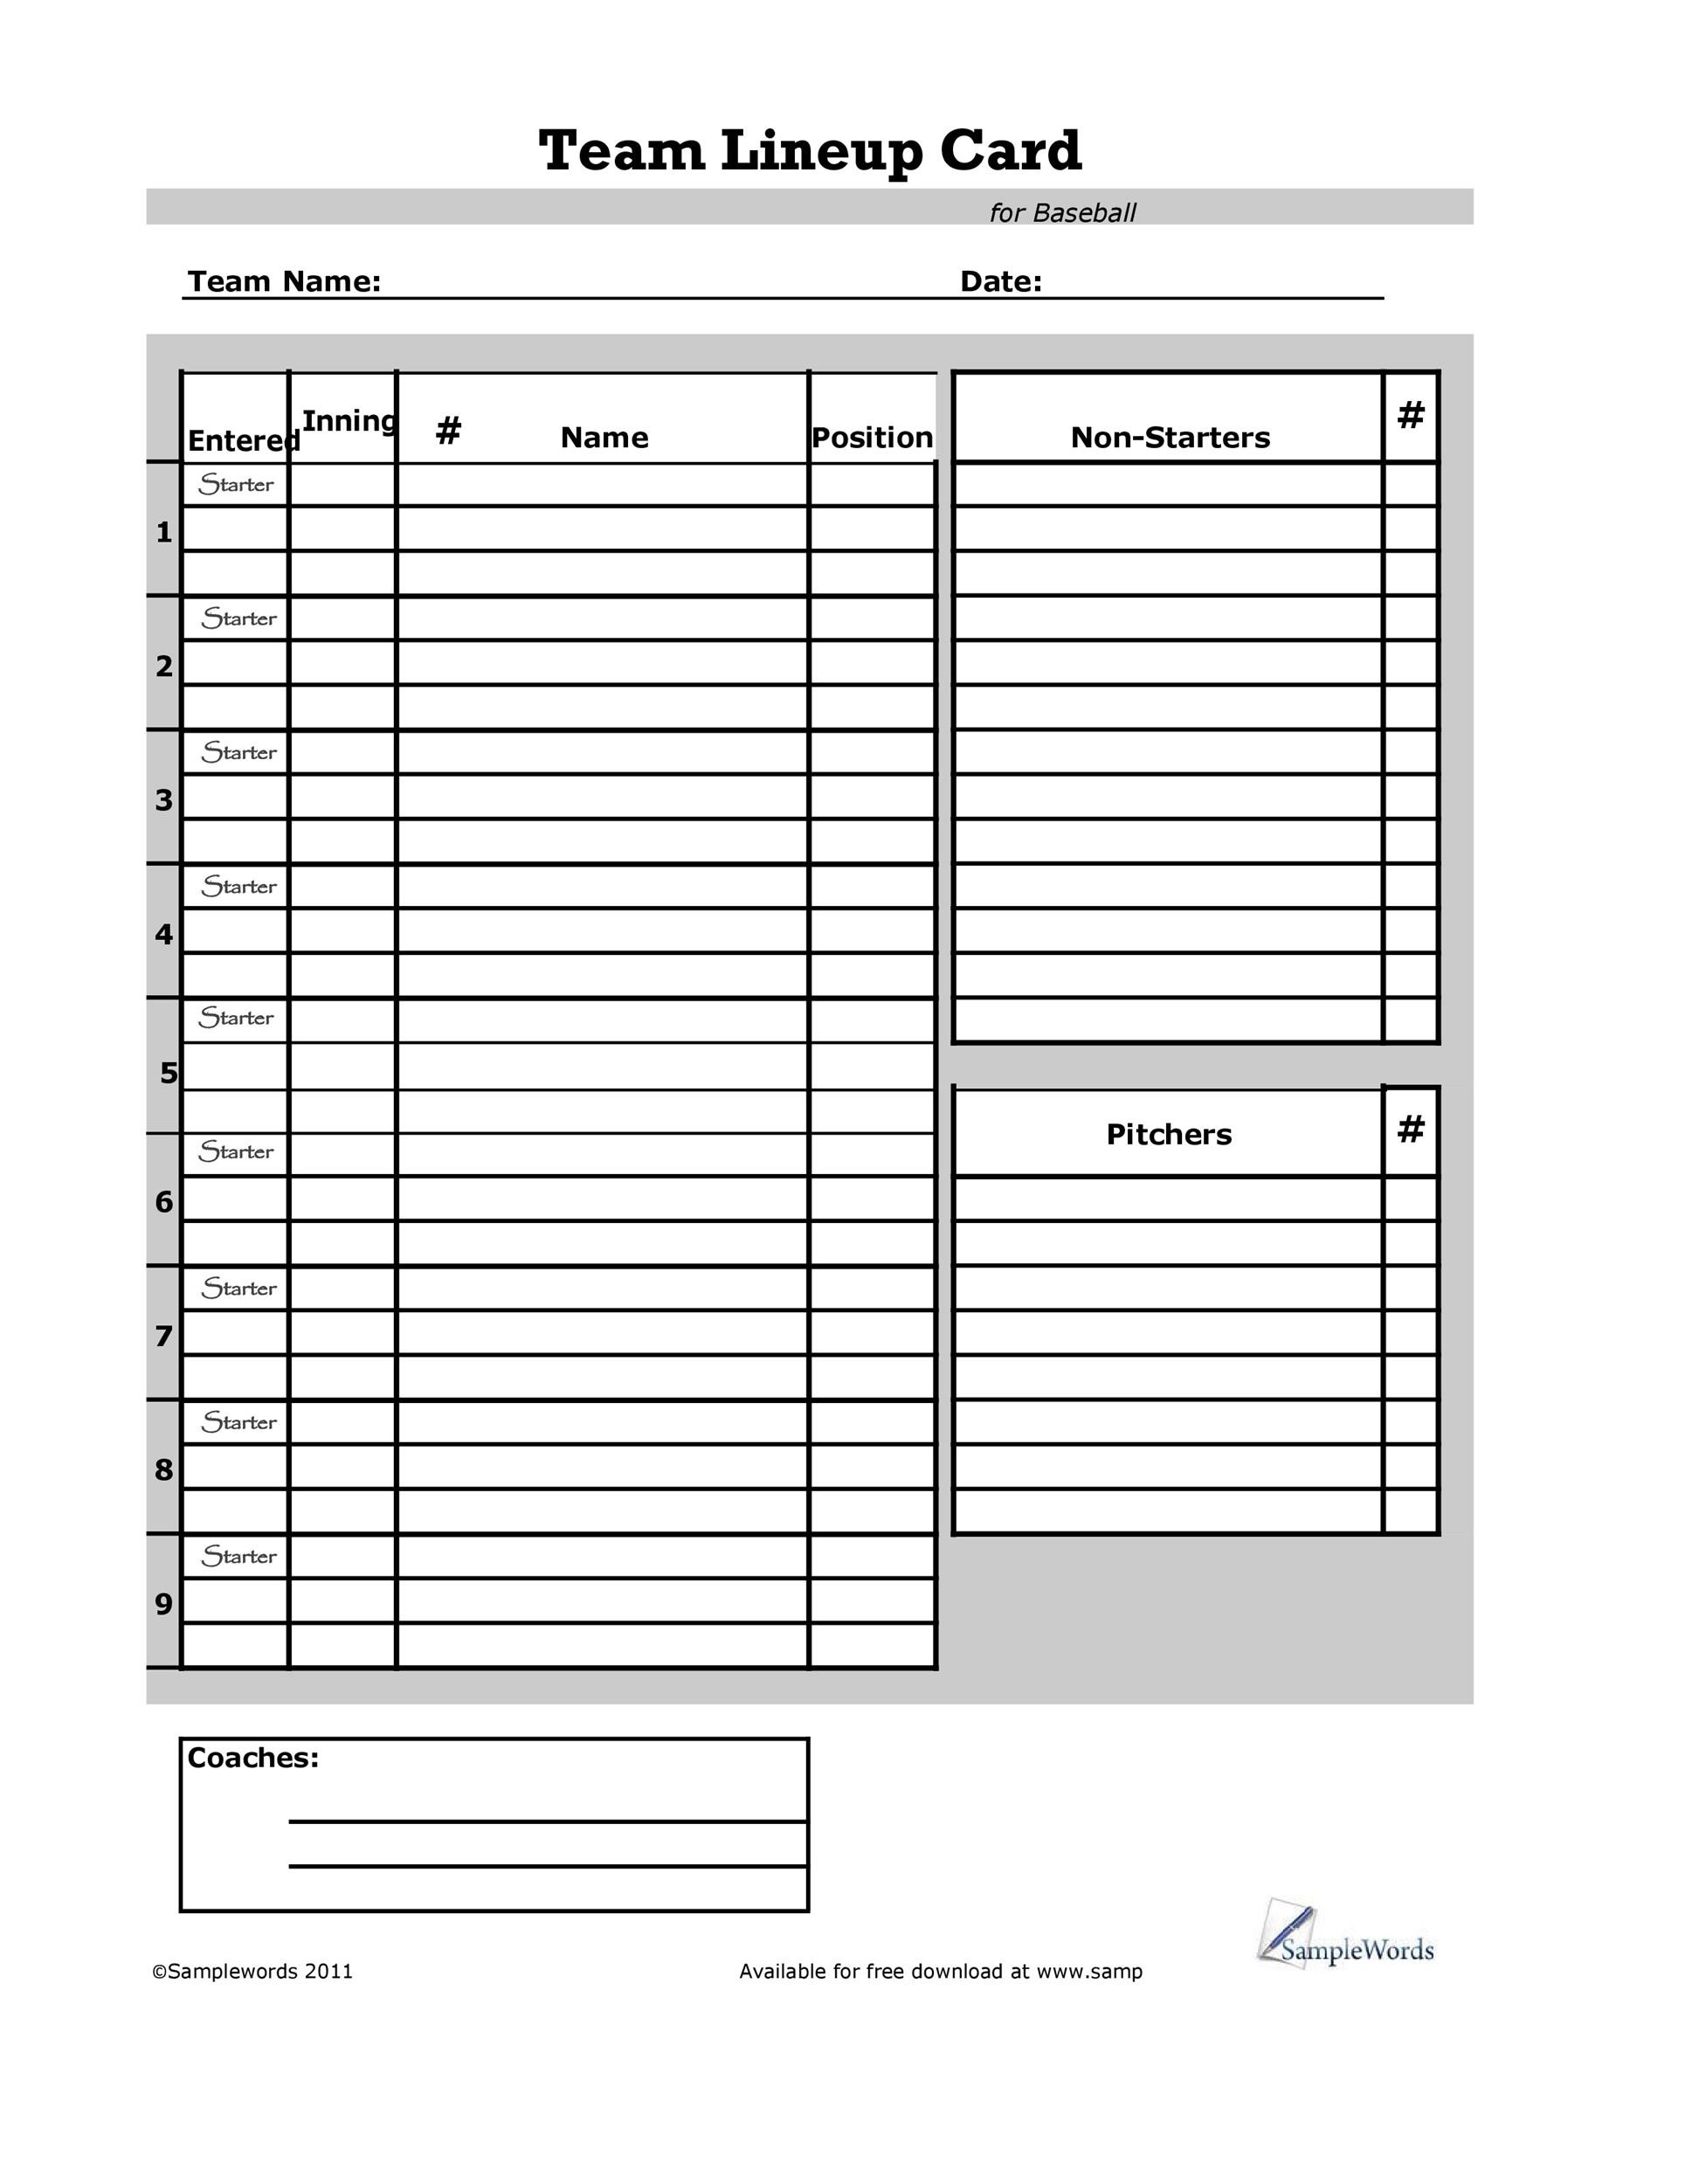 View 24 Inning Baseball Lineup Template Background : Fill, Sign And Throughout Baseball Lineup Card Template